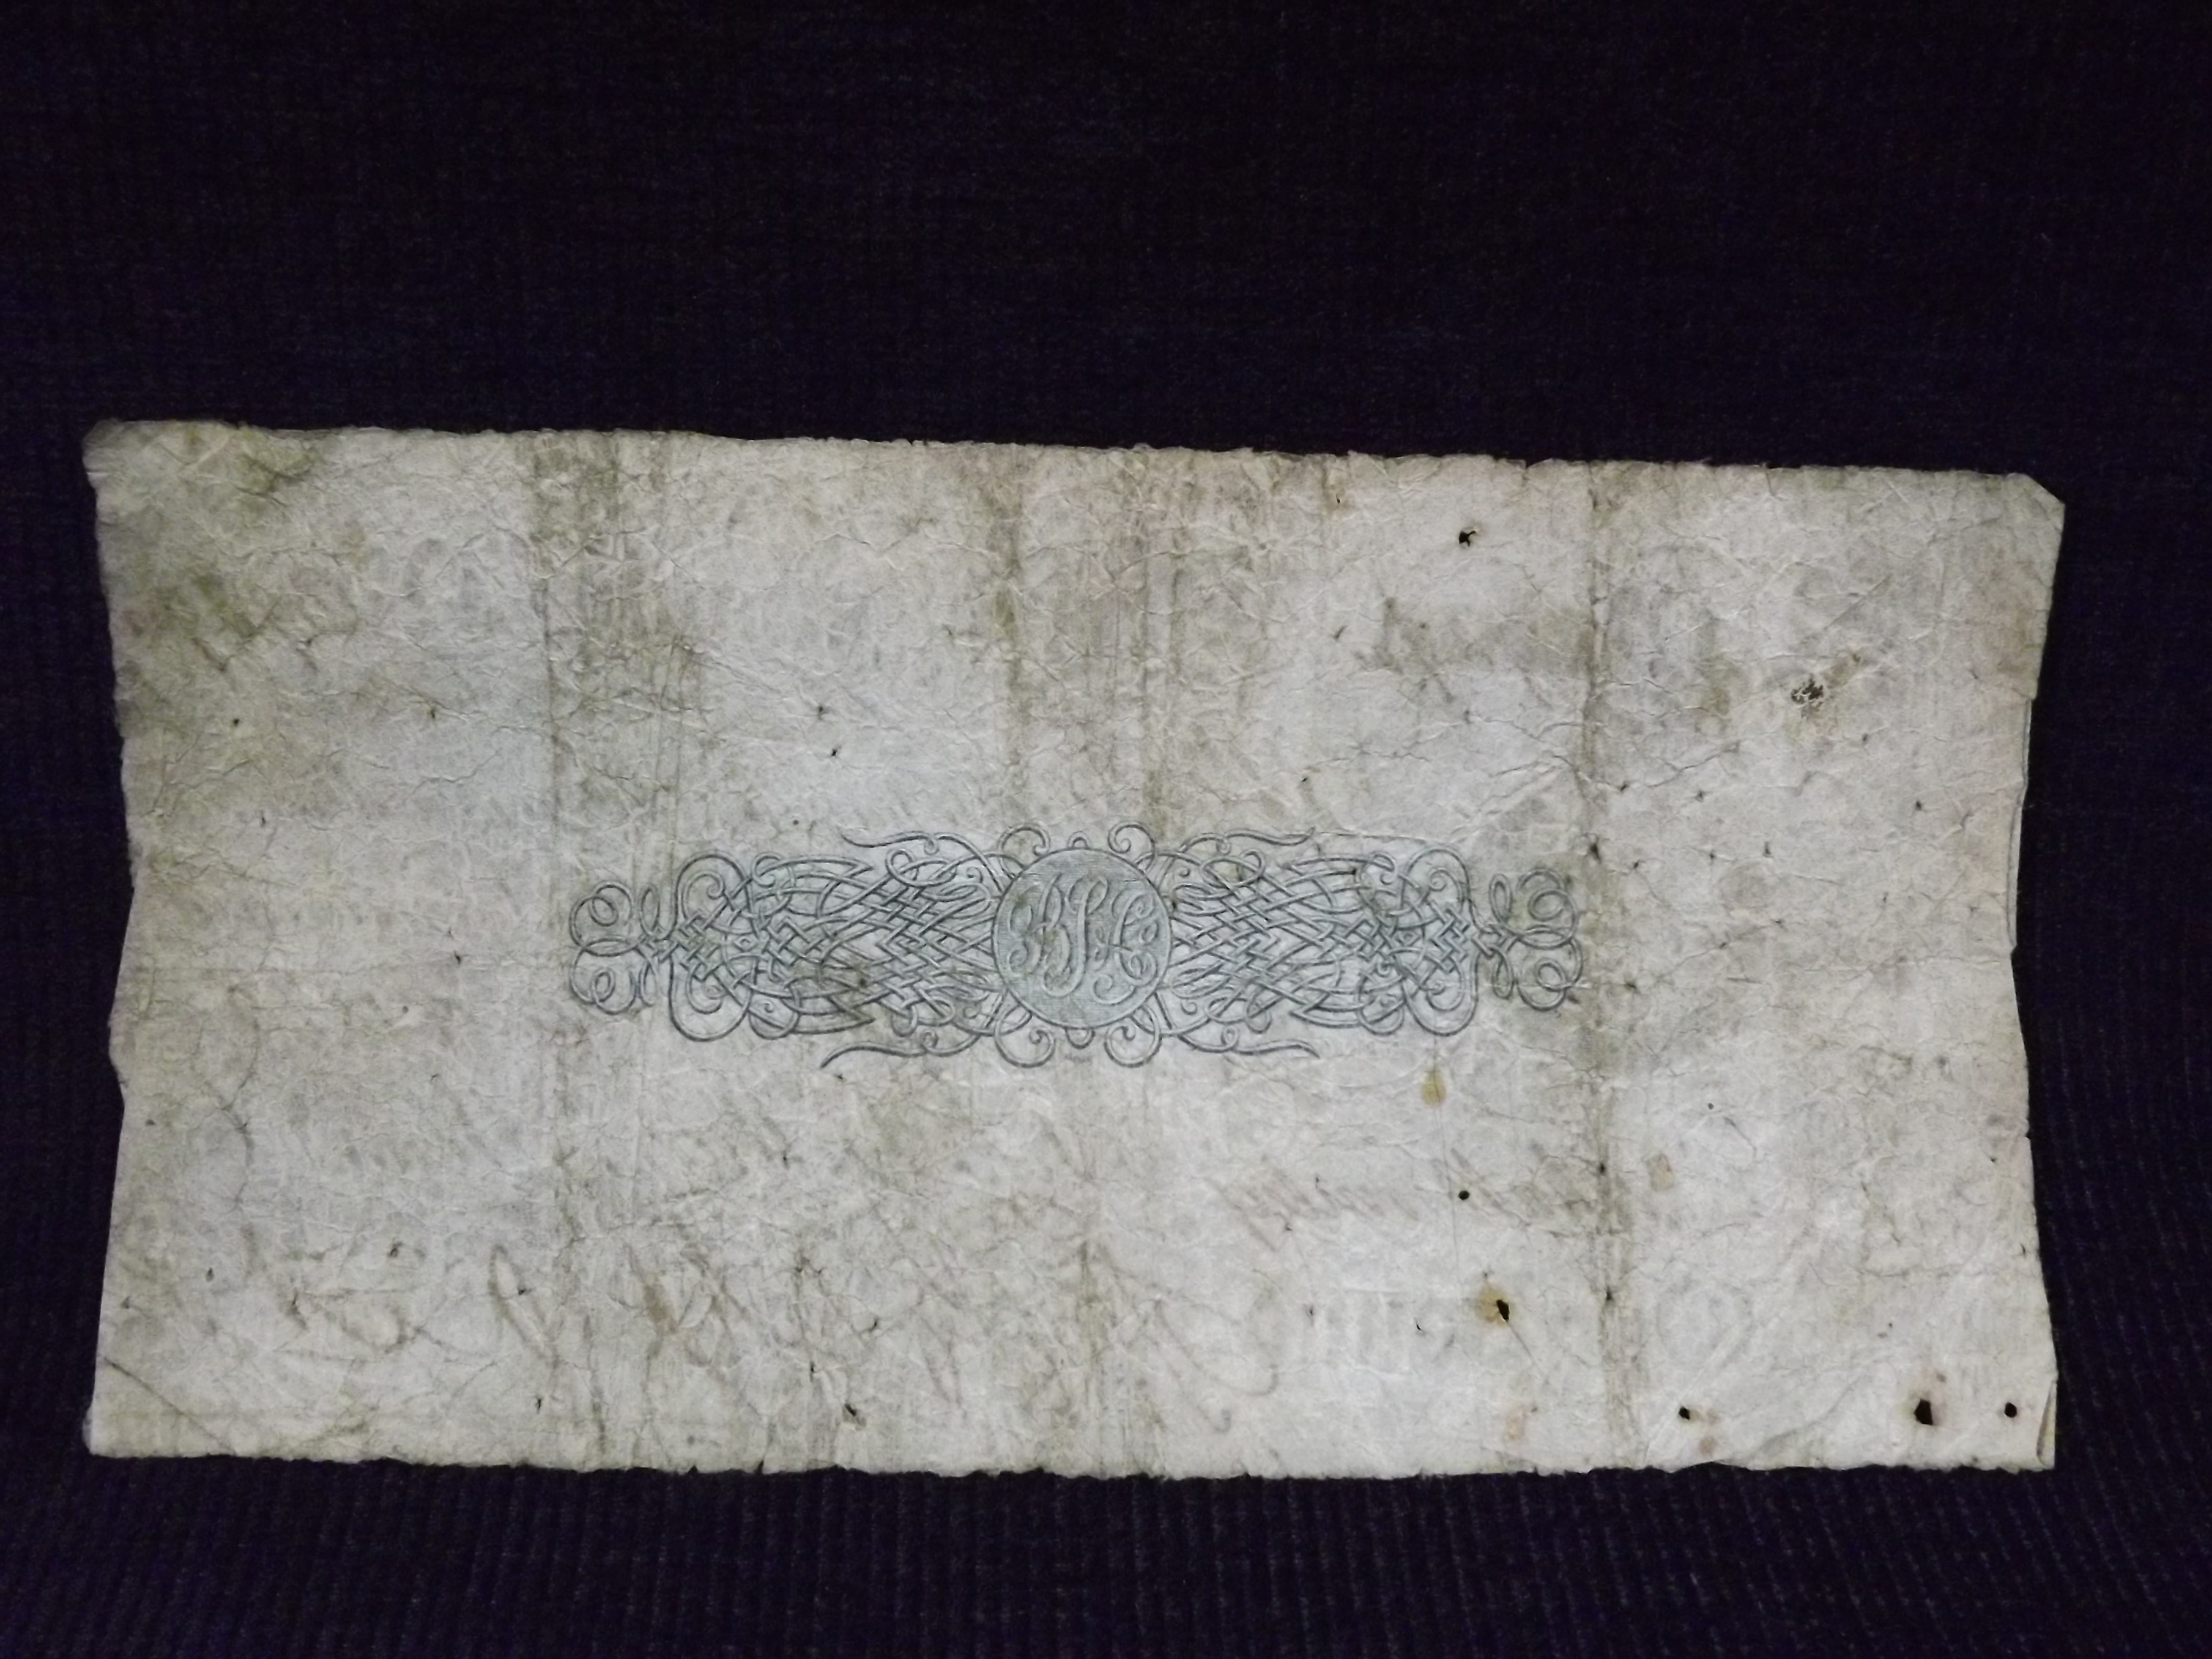 Great Britain Banknote. Derby Bank 1813 One Pound £1. Egde creases, staining, small holes - Image 4 of 4